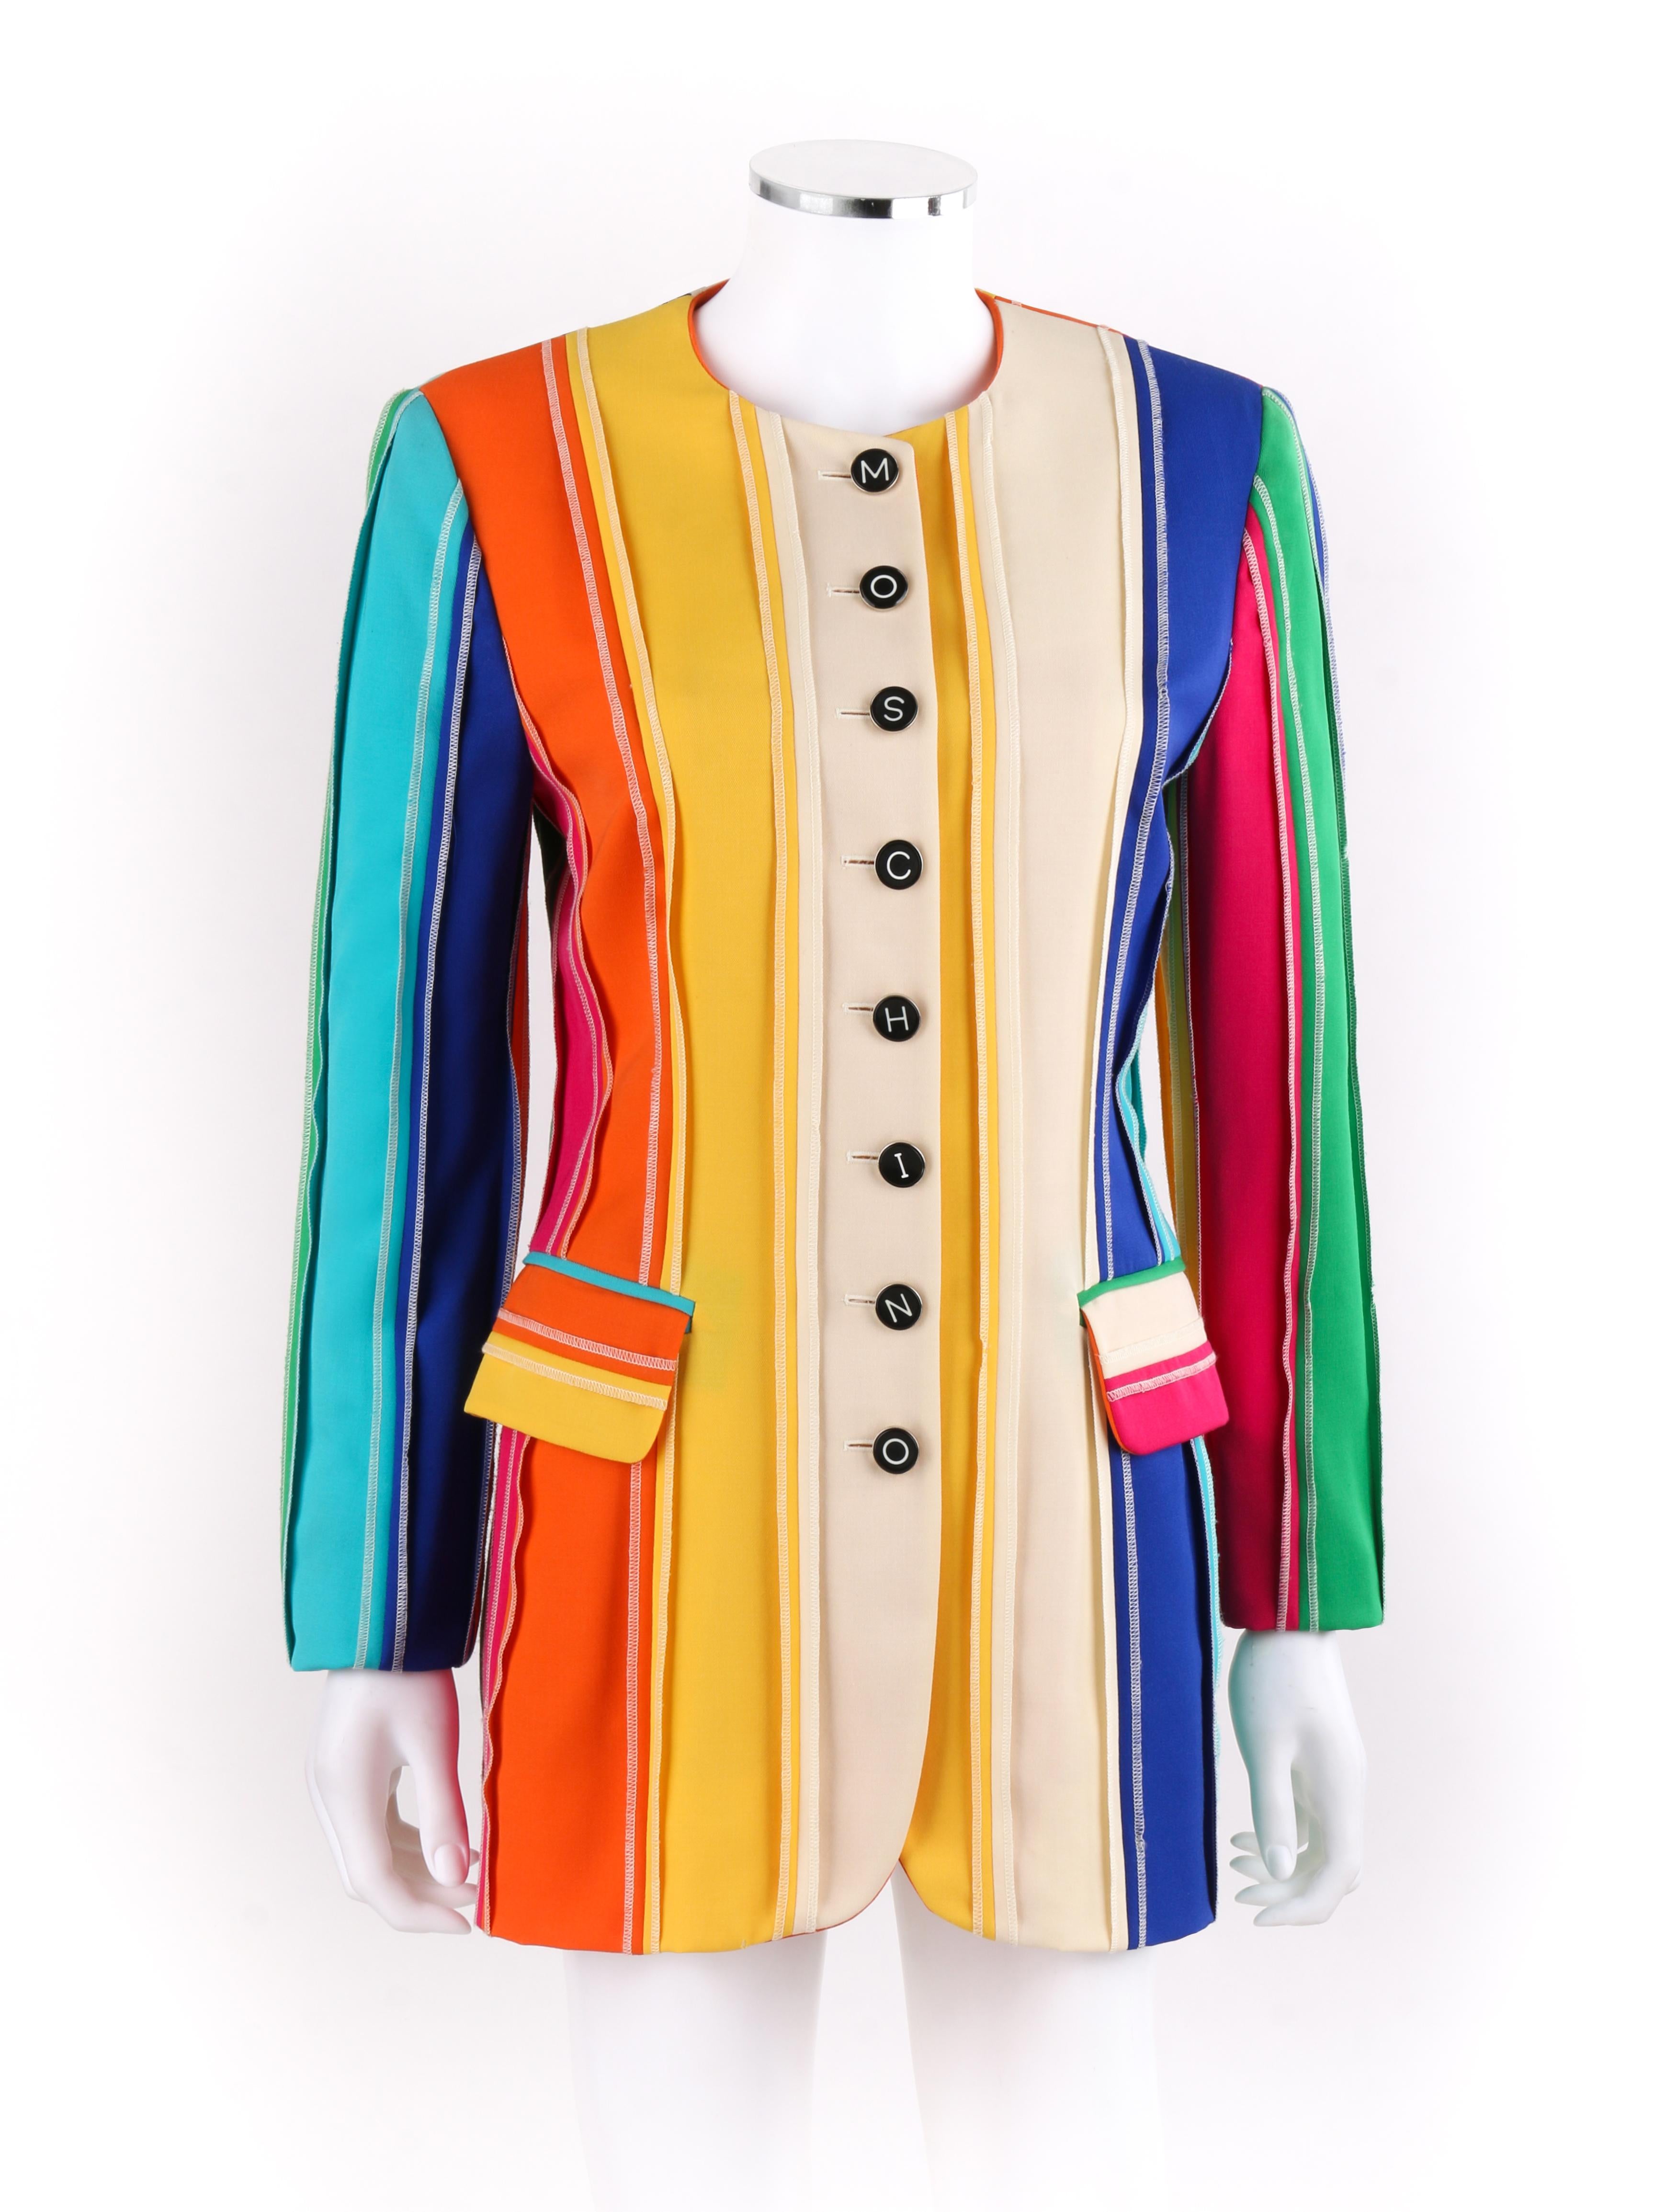 MOSCHINO c.1990's Couture Rainbow Multi-Color Stripe Signature Button-Front Blazer Jacket
 
Circa: 1990’s
Label(s): Moschino / Couture / Repetita Juvant  
Style: Cardigan, jacket
Color(s): Shades of pink, orange, yellow, green, blue and off-white.